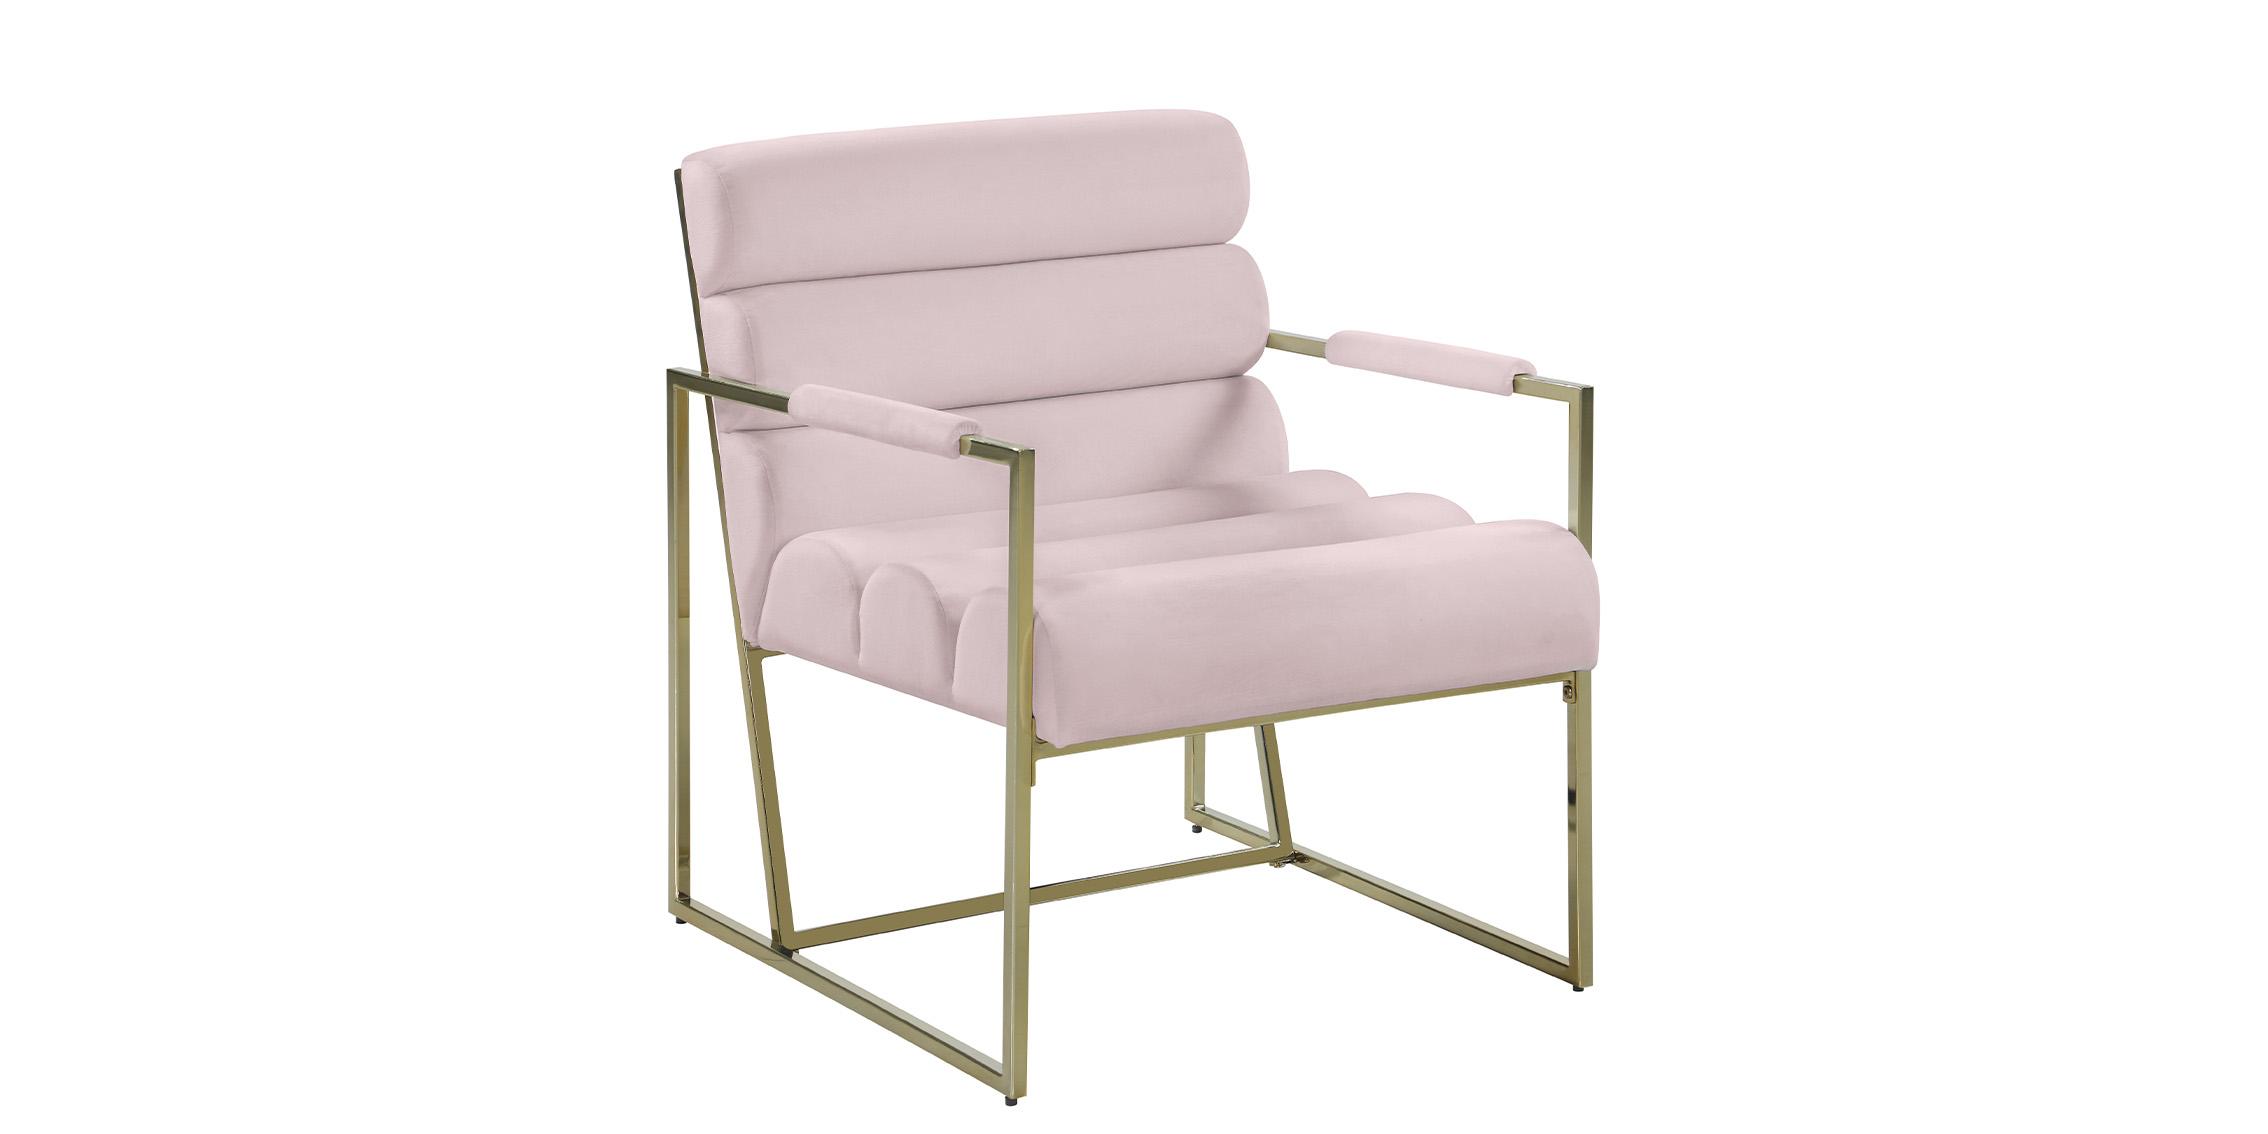 Contemporary, Modern Accent Chair WAYNE 526Pink 526Pink in Pink, Gold Velvet